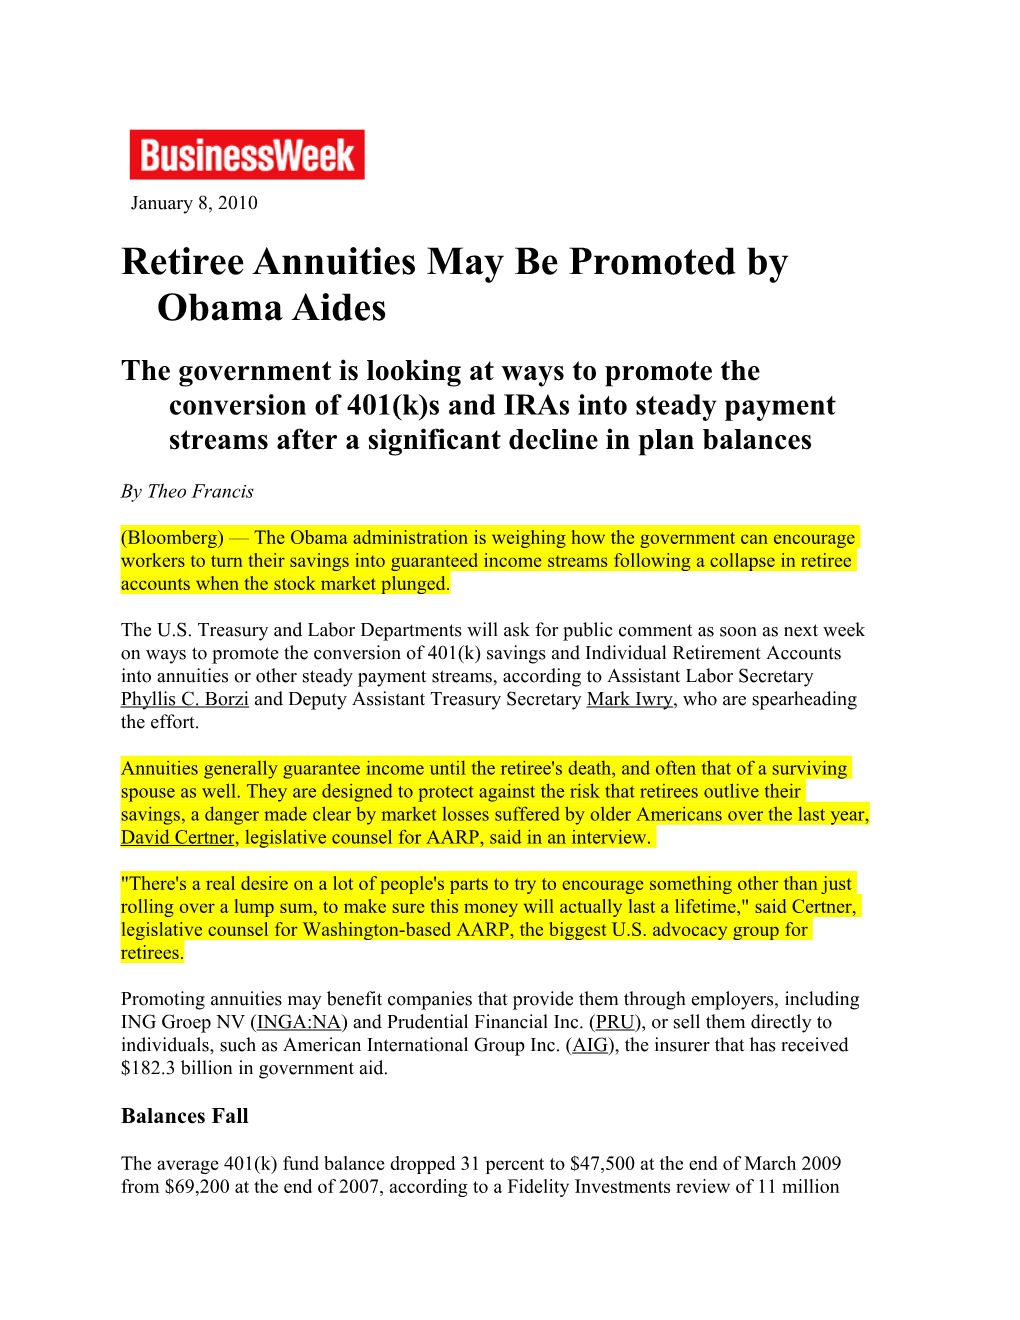 Retiree Annuities May Be Promoted by Obama Aides